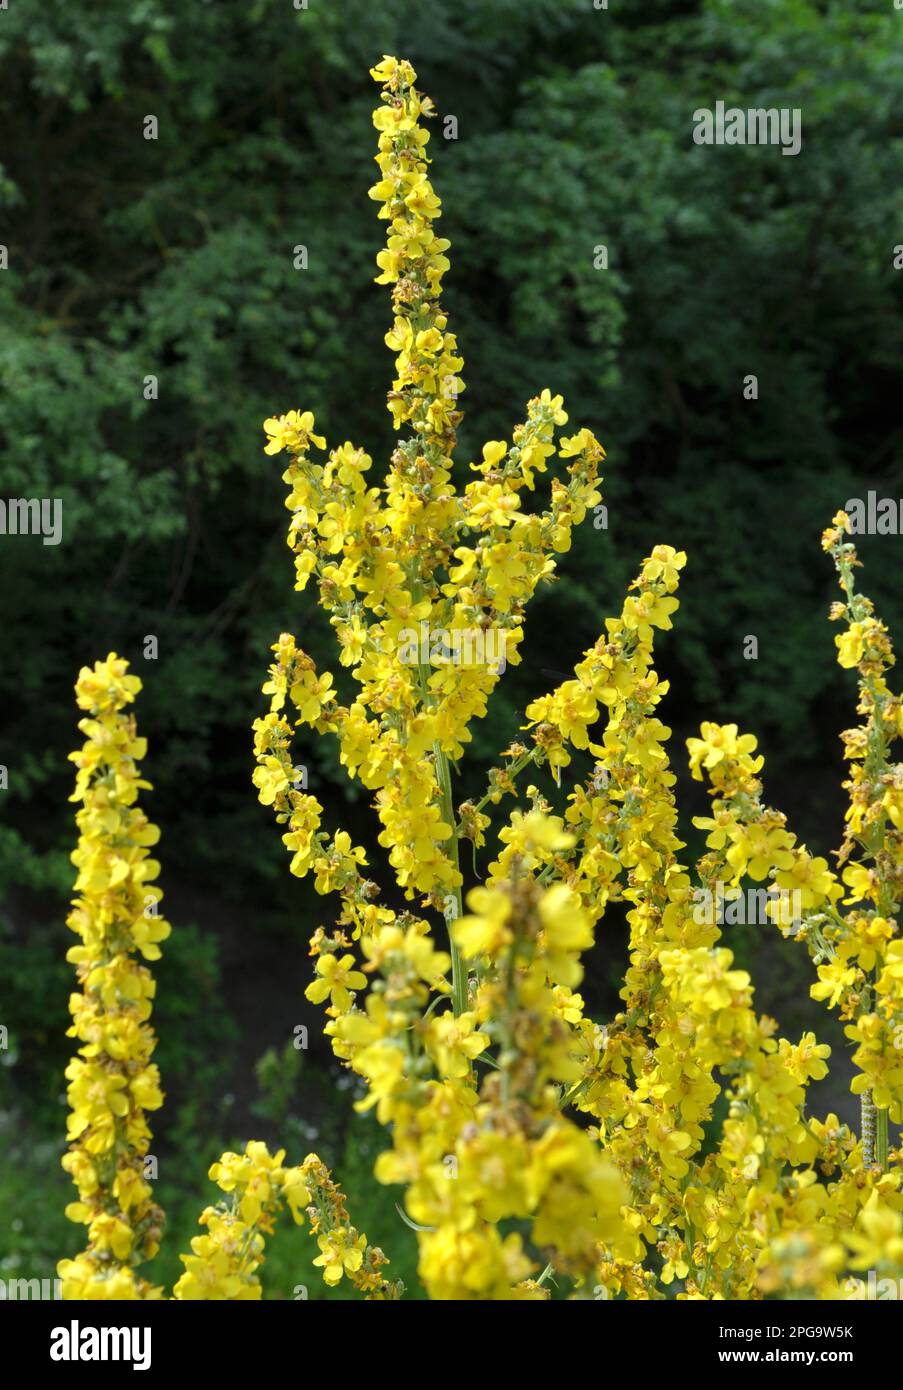 One of the species of mullein, Verbascum lychnitis, blooms in the wild Stock Photo